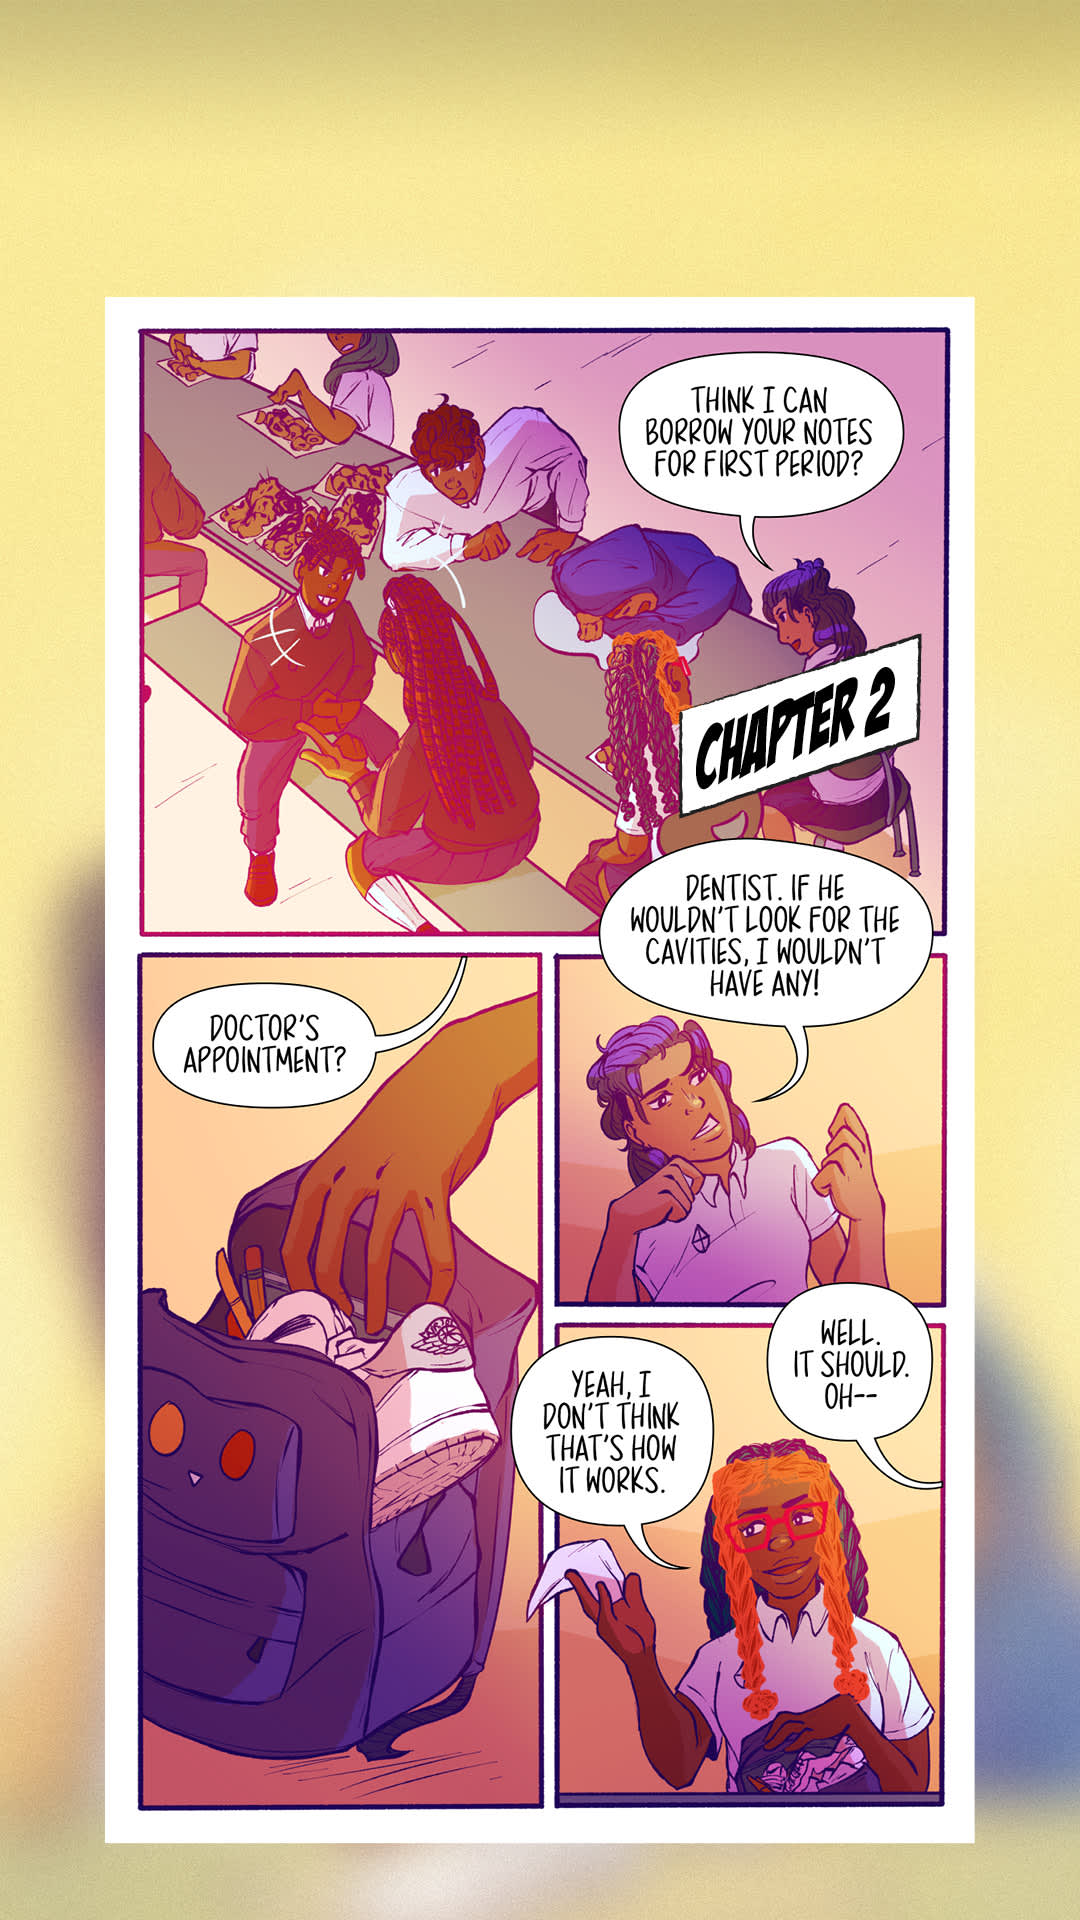 Marisole Webcomic: Issue 3, Chapter 2